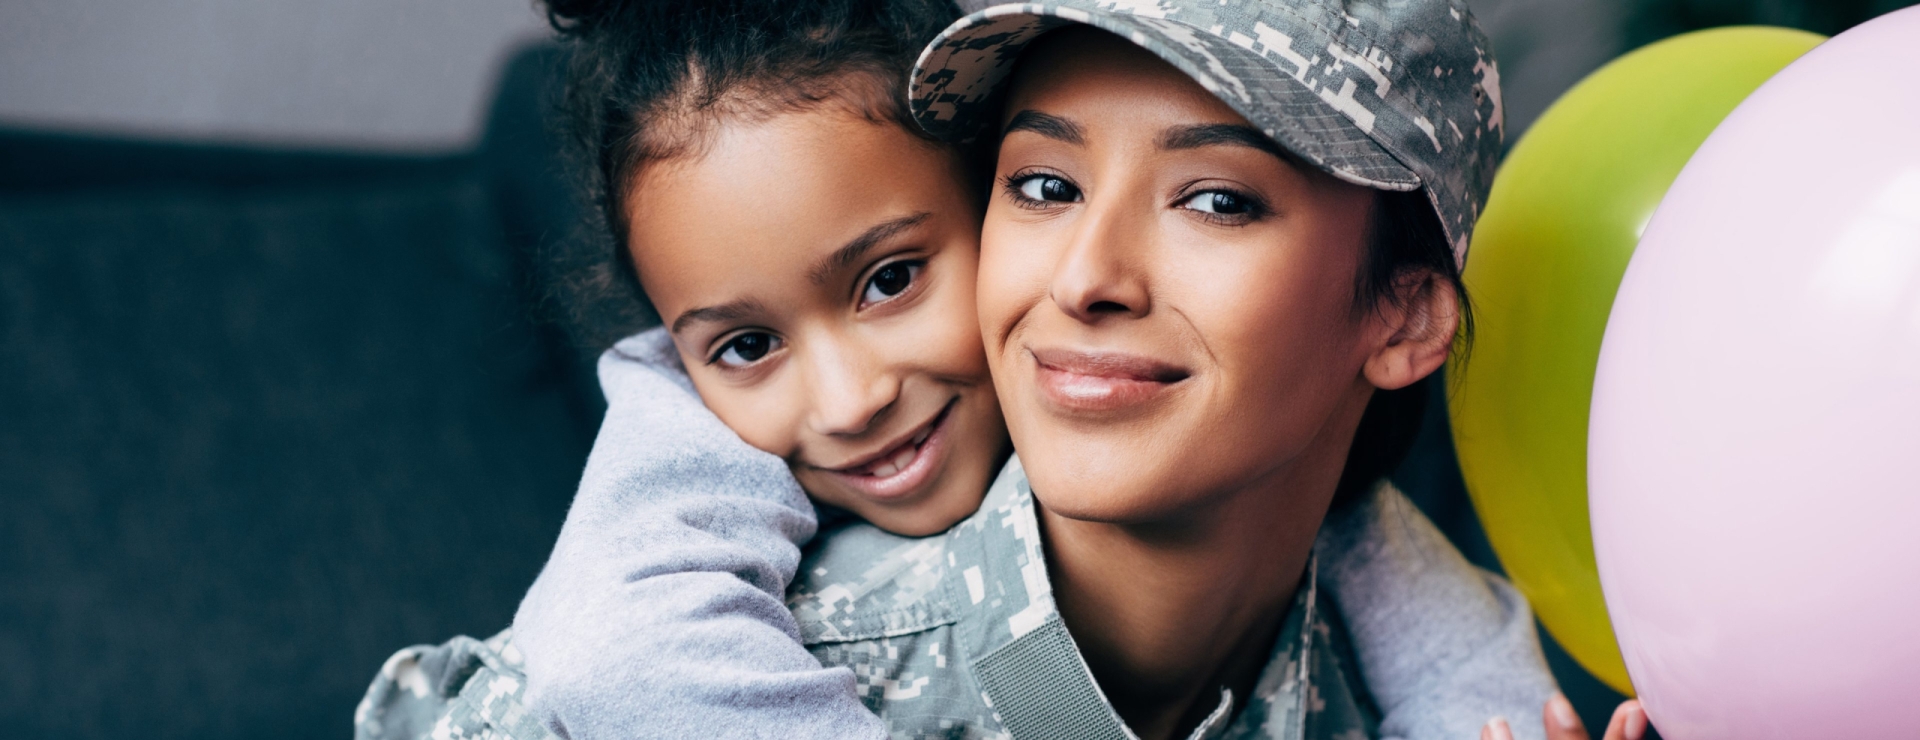 Military woman and child